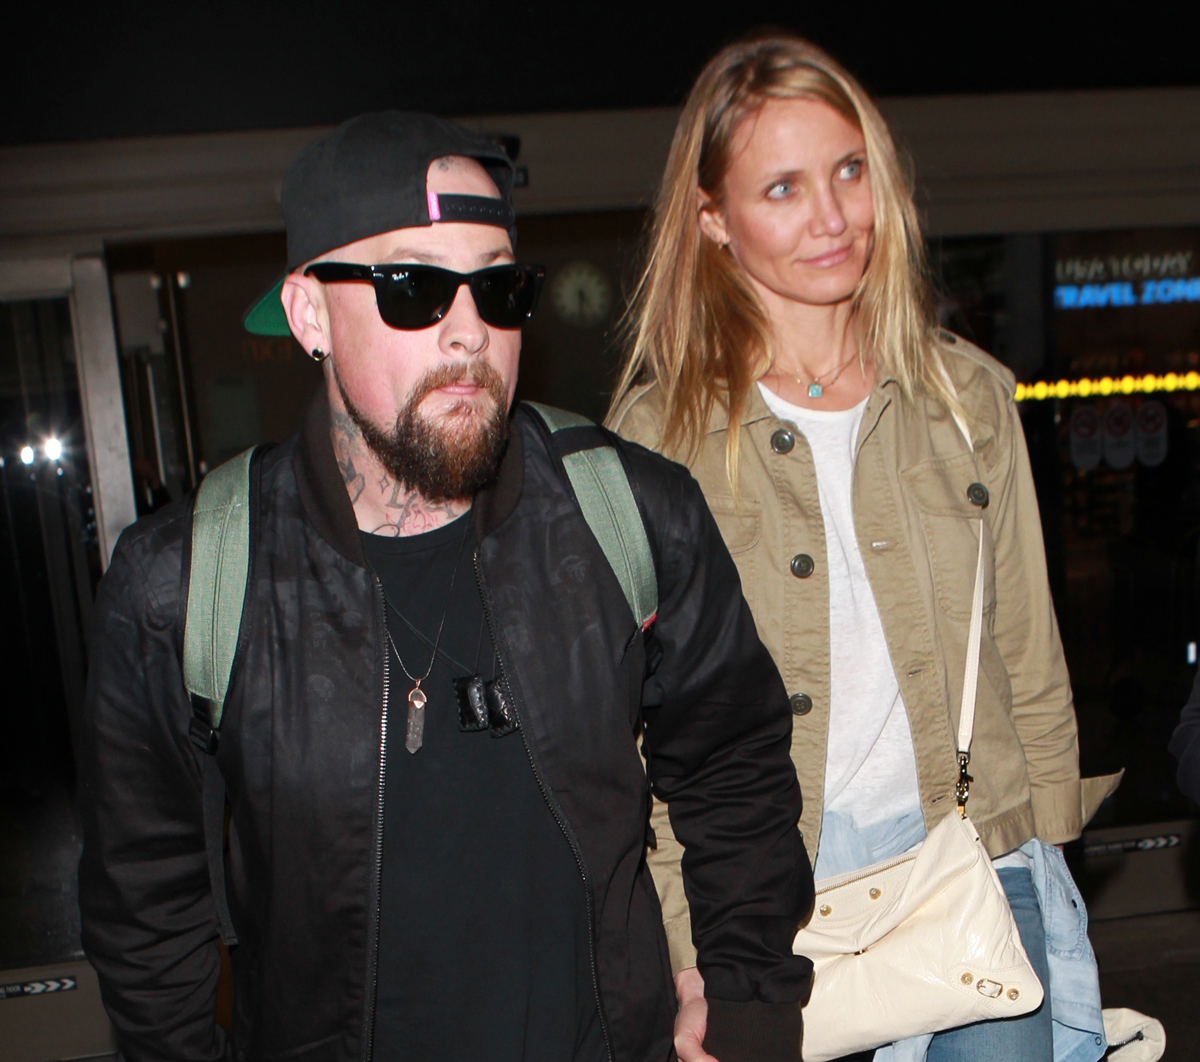 Cameron Diaz Husband : Cameron Diaz Husband Benji Madden Hold Hands On Sushi Date : San diego, california, united states occupation former partner :